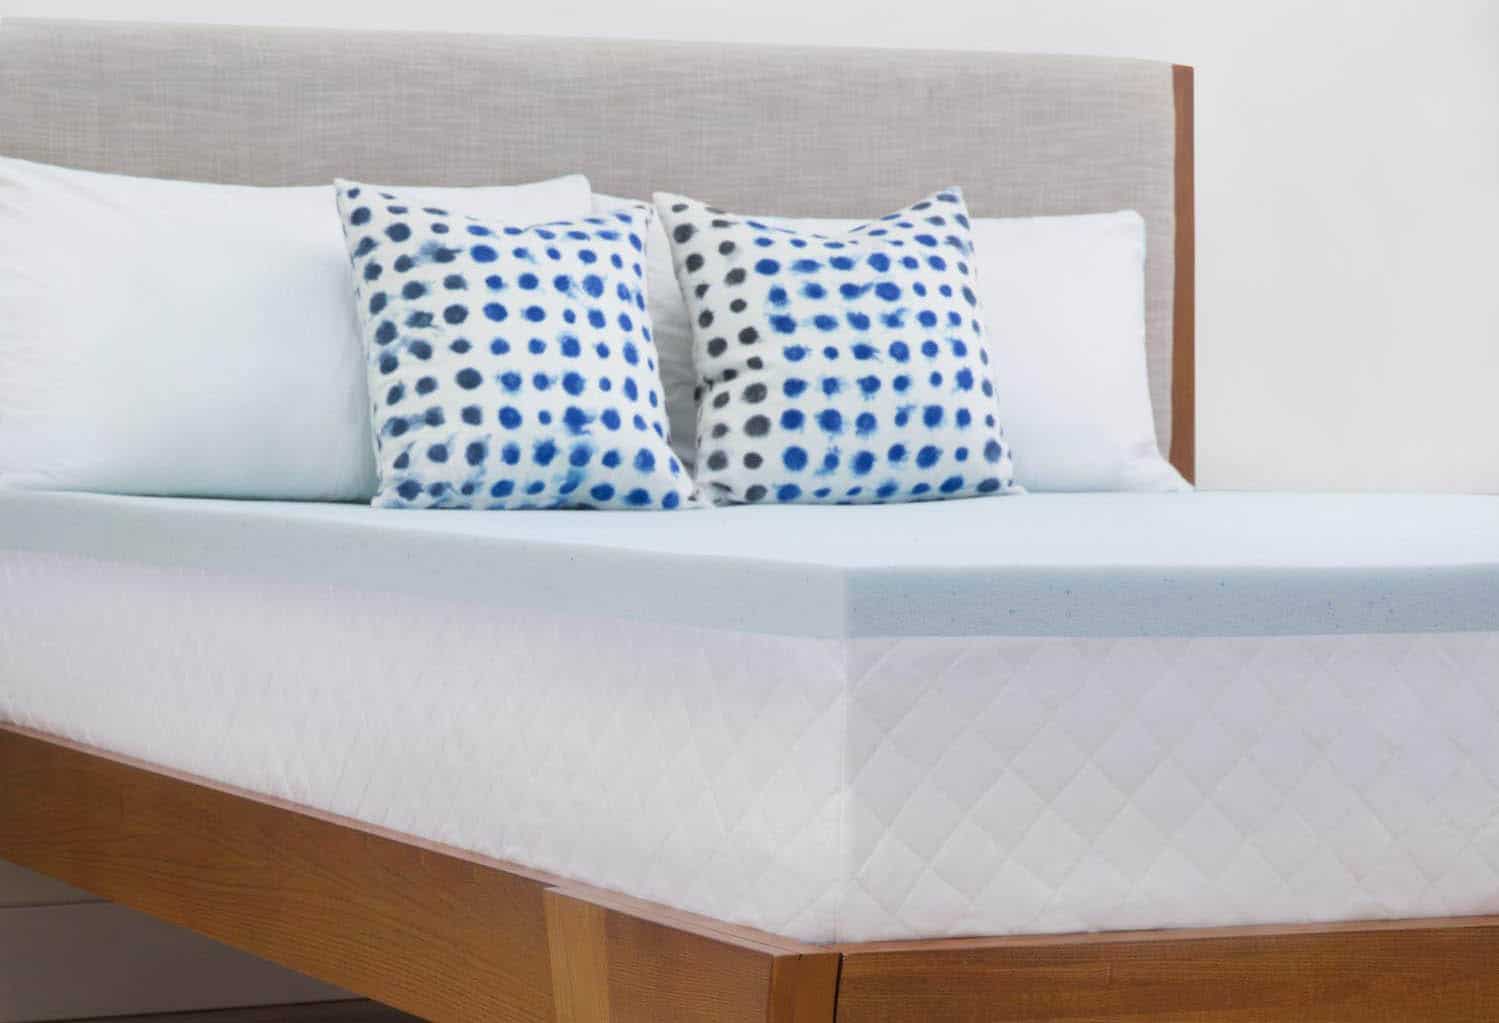 Are Mattress Toppers Good Or Bad?